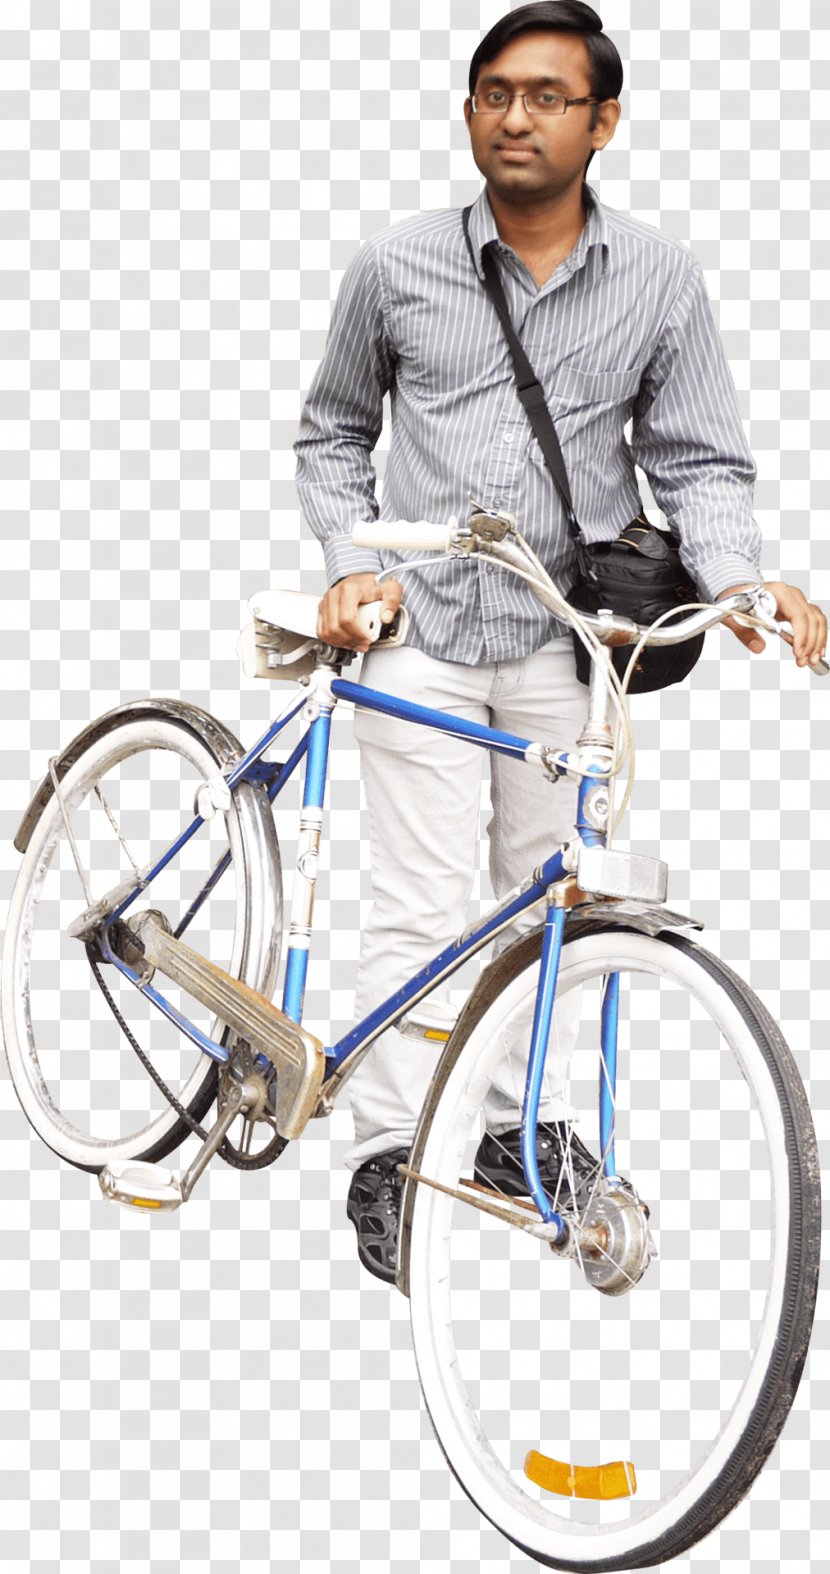 Bicycle Cycling - Vehicle - Man With Image Transparent PNG